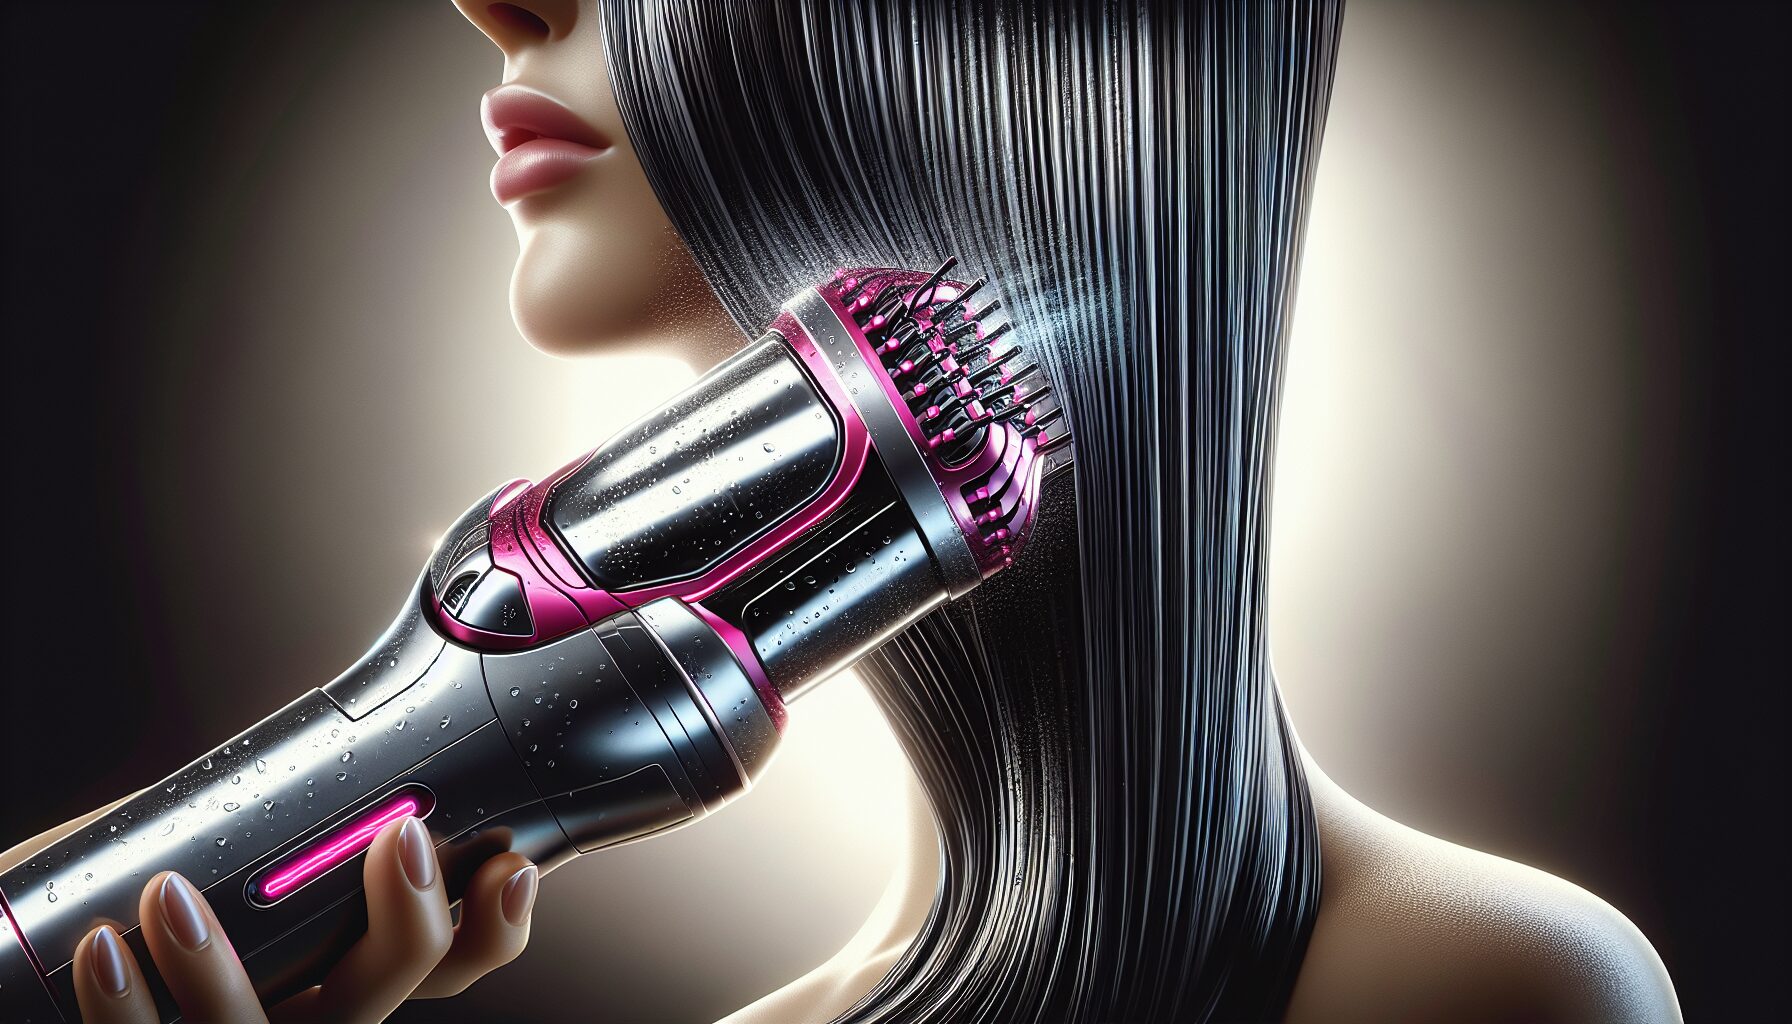 Can You Use The Dyson Airwrap On Wet Hair?